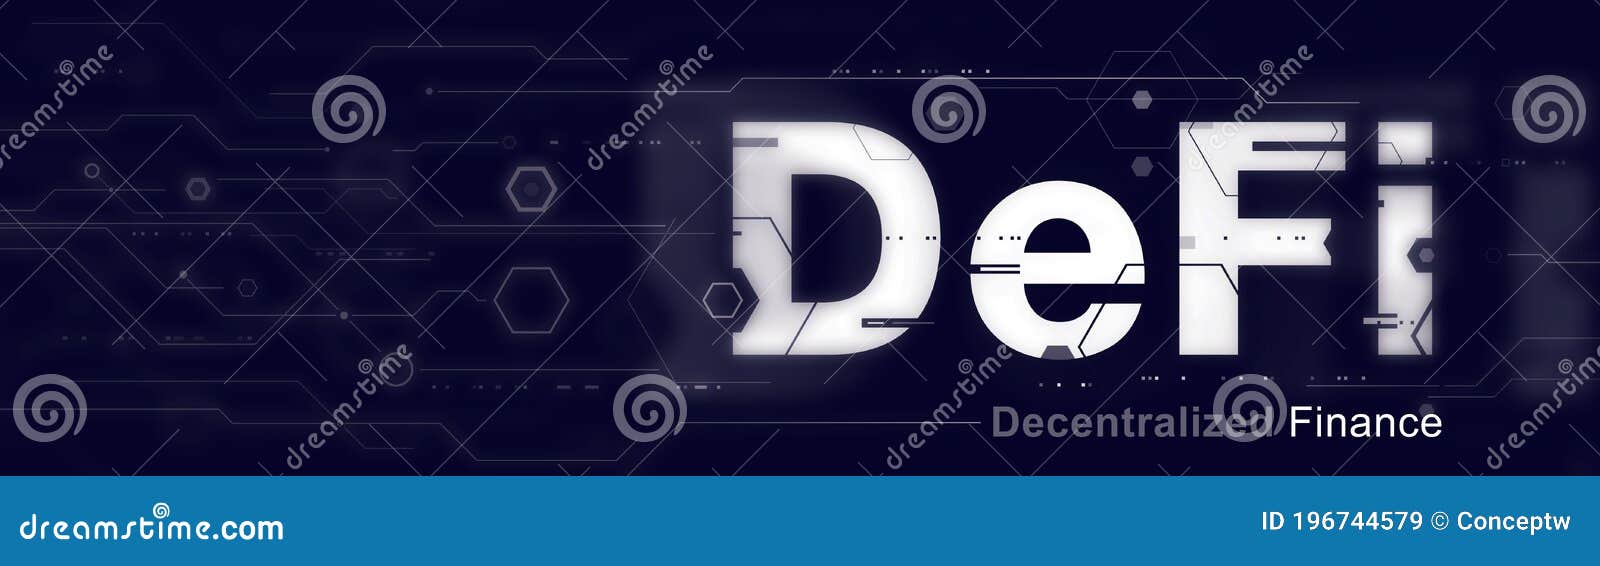 defi - decentralized finance and crypto finance